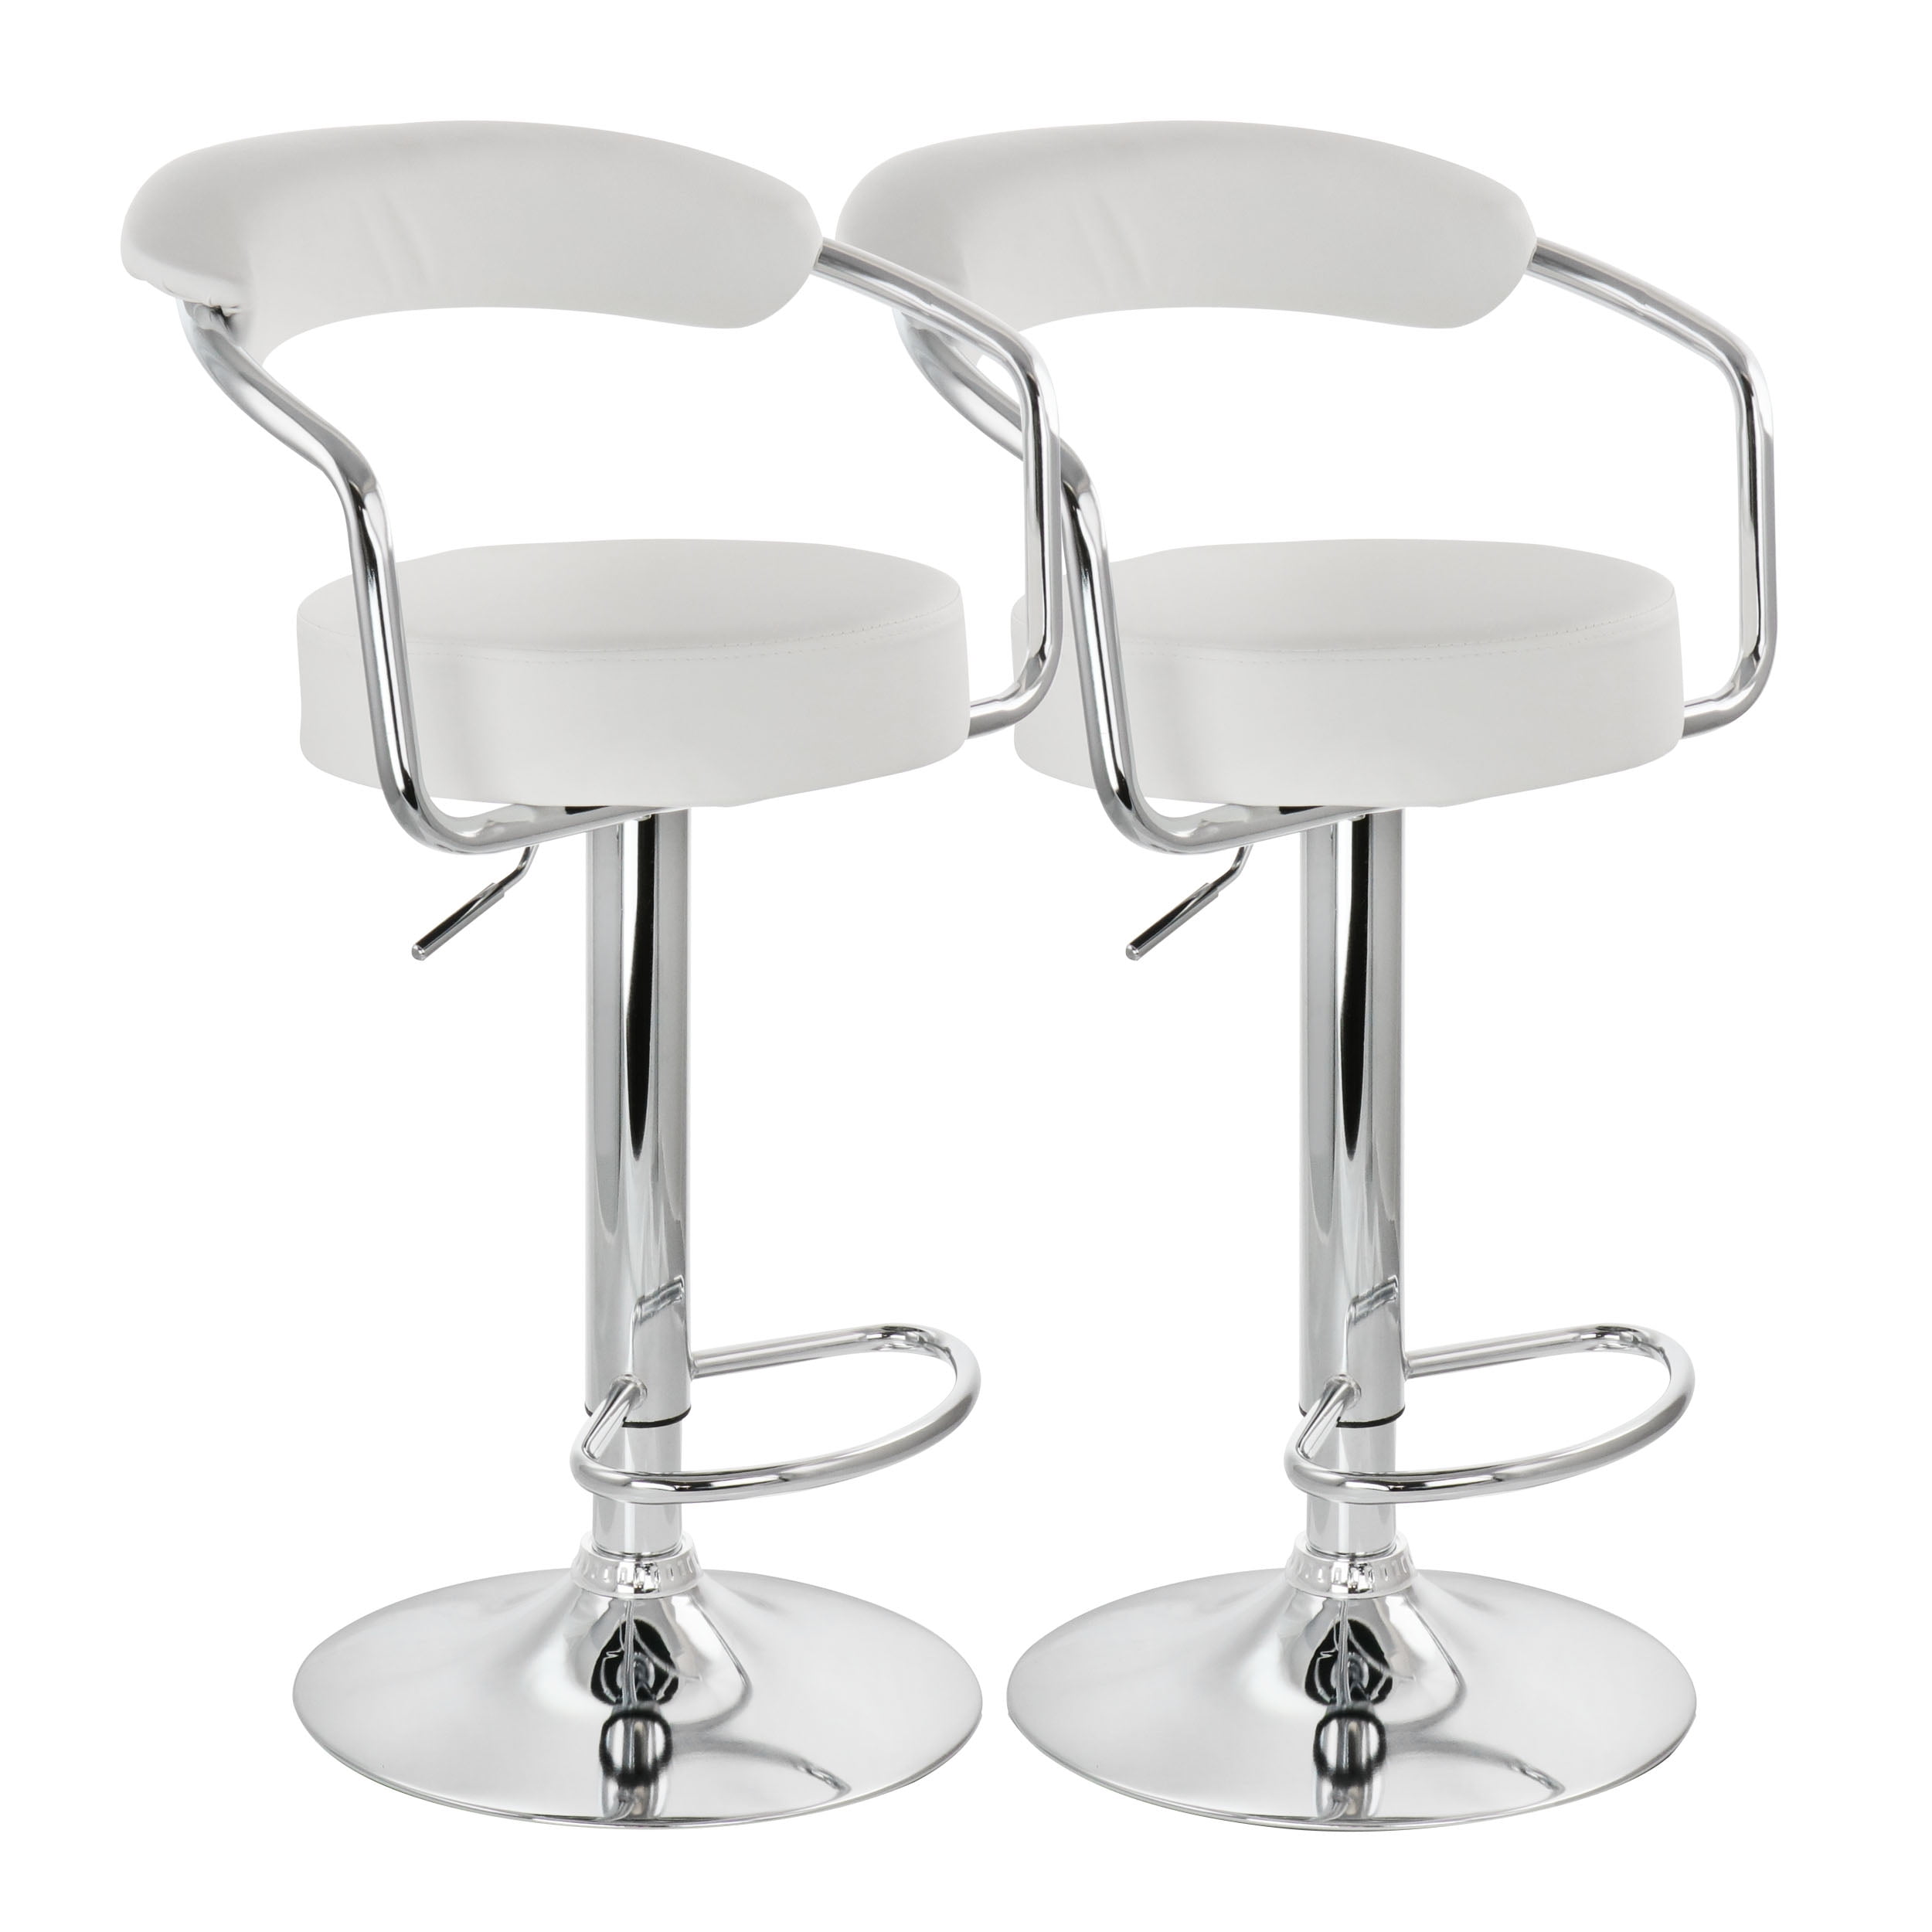 Moustache® 2 sets 1 pair Swivel Leather Adjustable Bar Stool home office White 